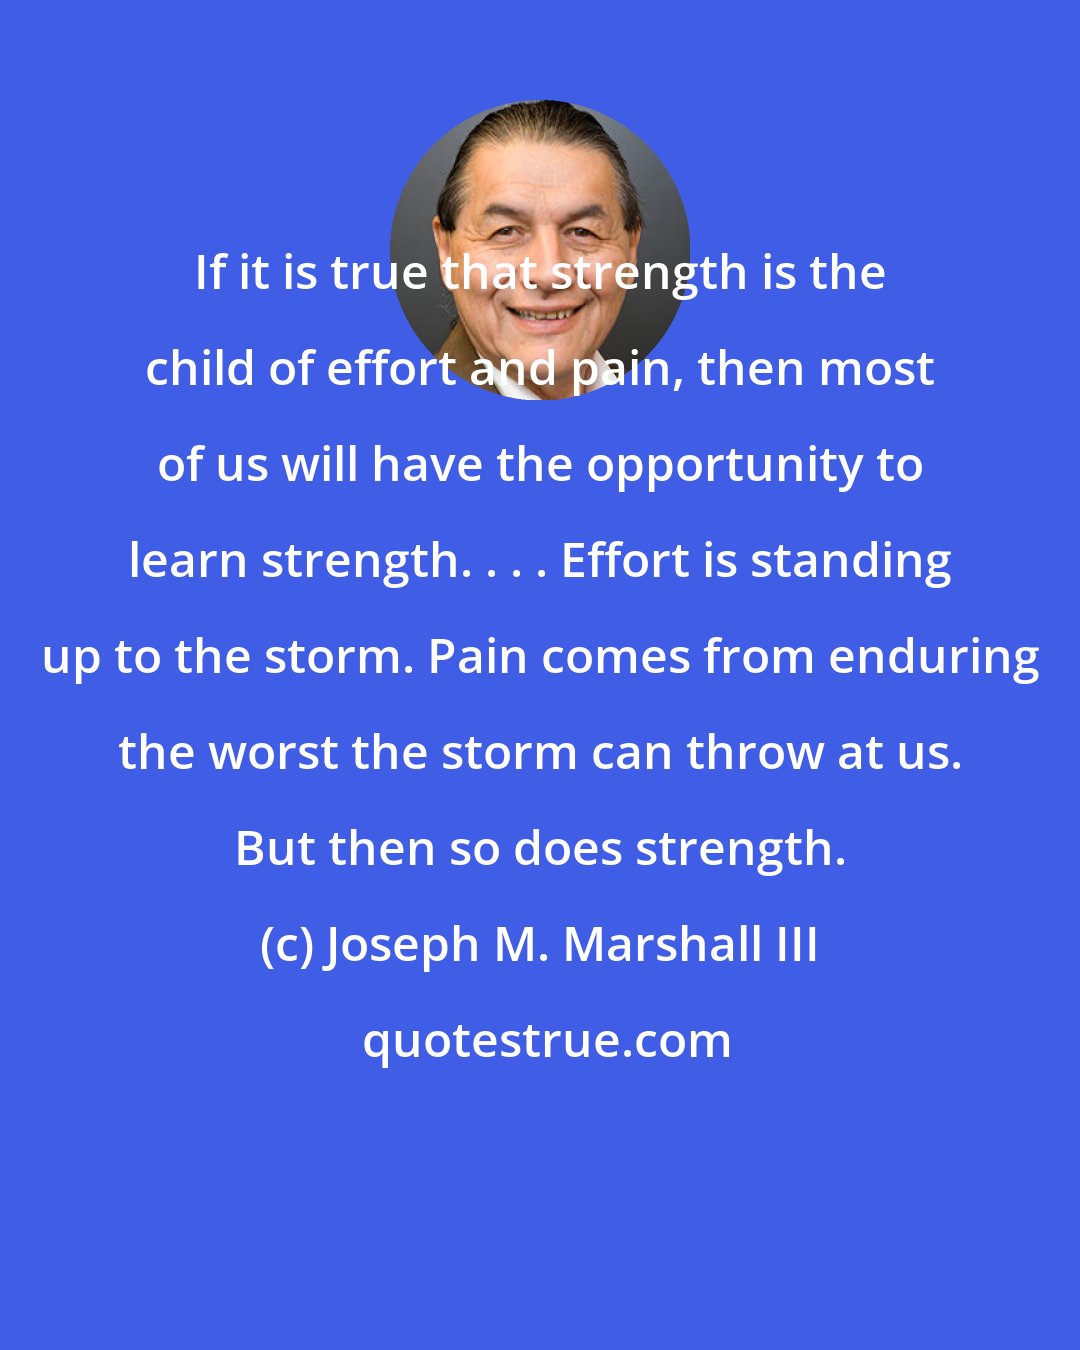 Joseph M. Marshall III: If it is true that strength is the child of effort and pain, then most of us will have the opportunity to learn strength. . . . Effort is standing up to the storm. Pain comes from enduring the worst the storm can throw at us. But then so does strength.